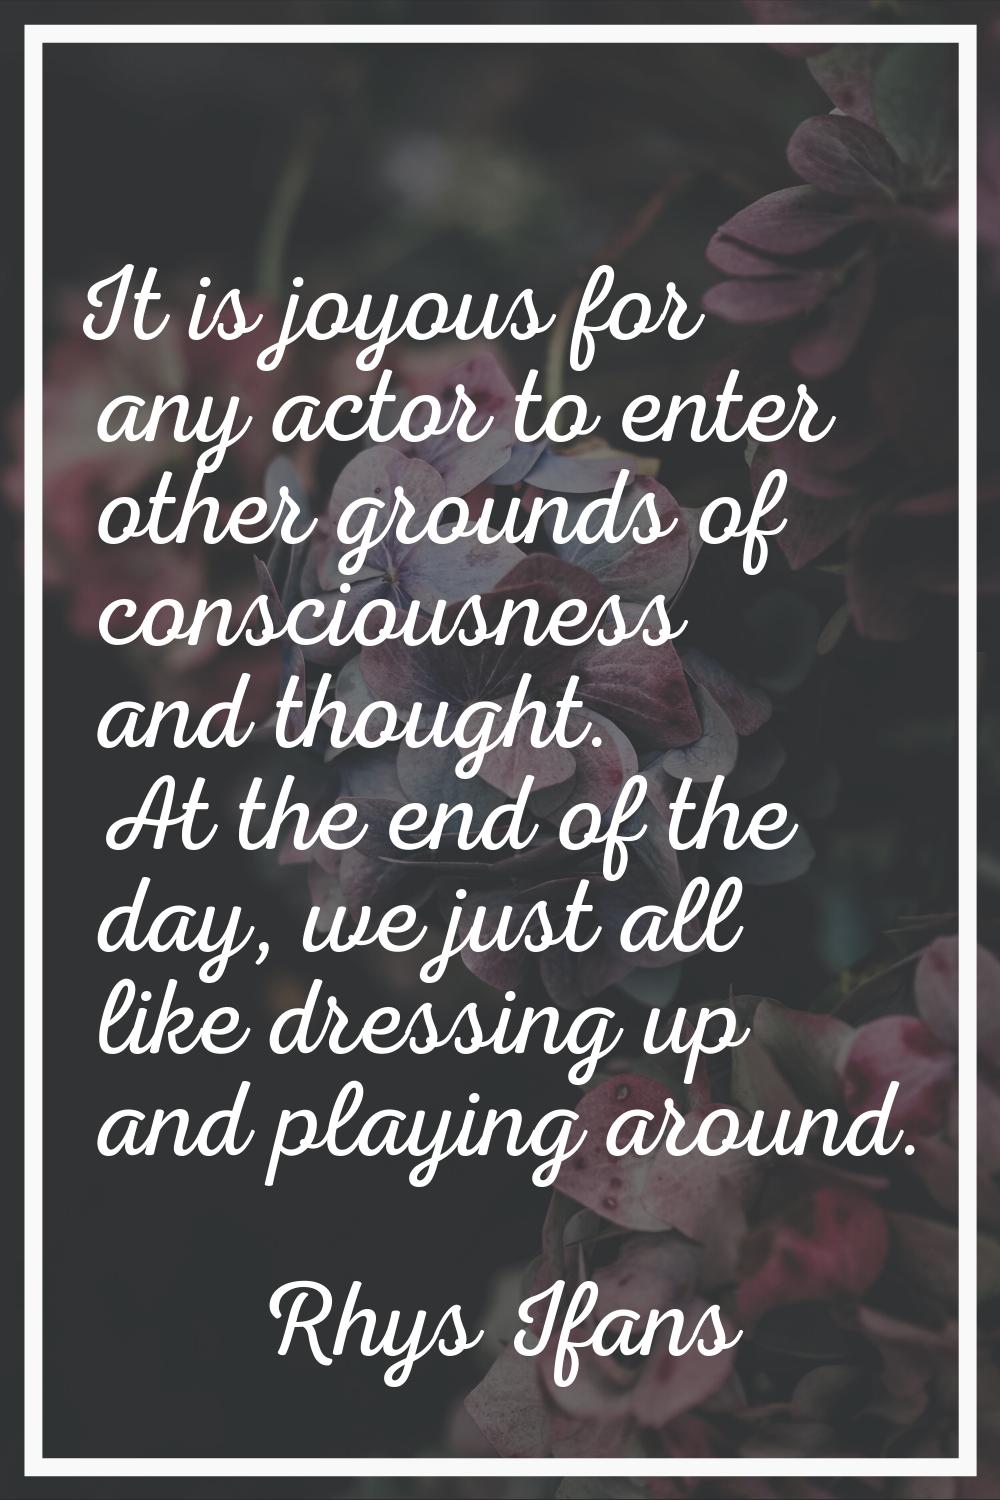 It is joyous for any actor to enter other grounds of consciousness and thought. At the end of the d